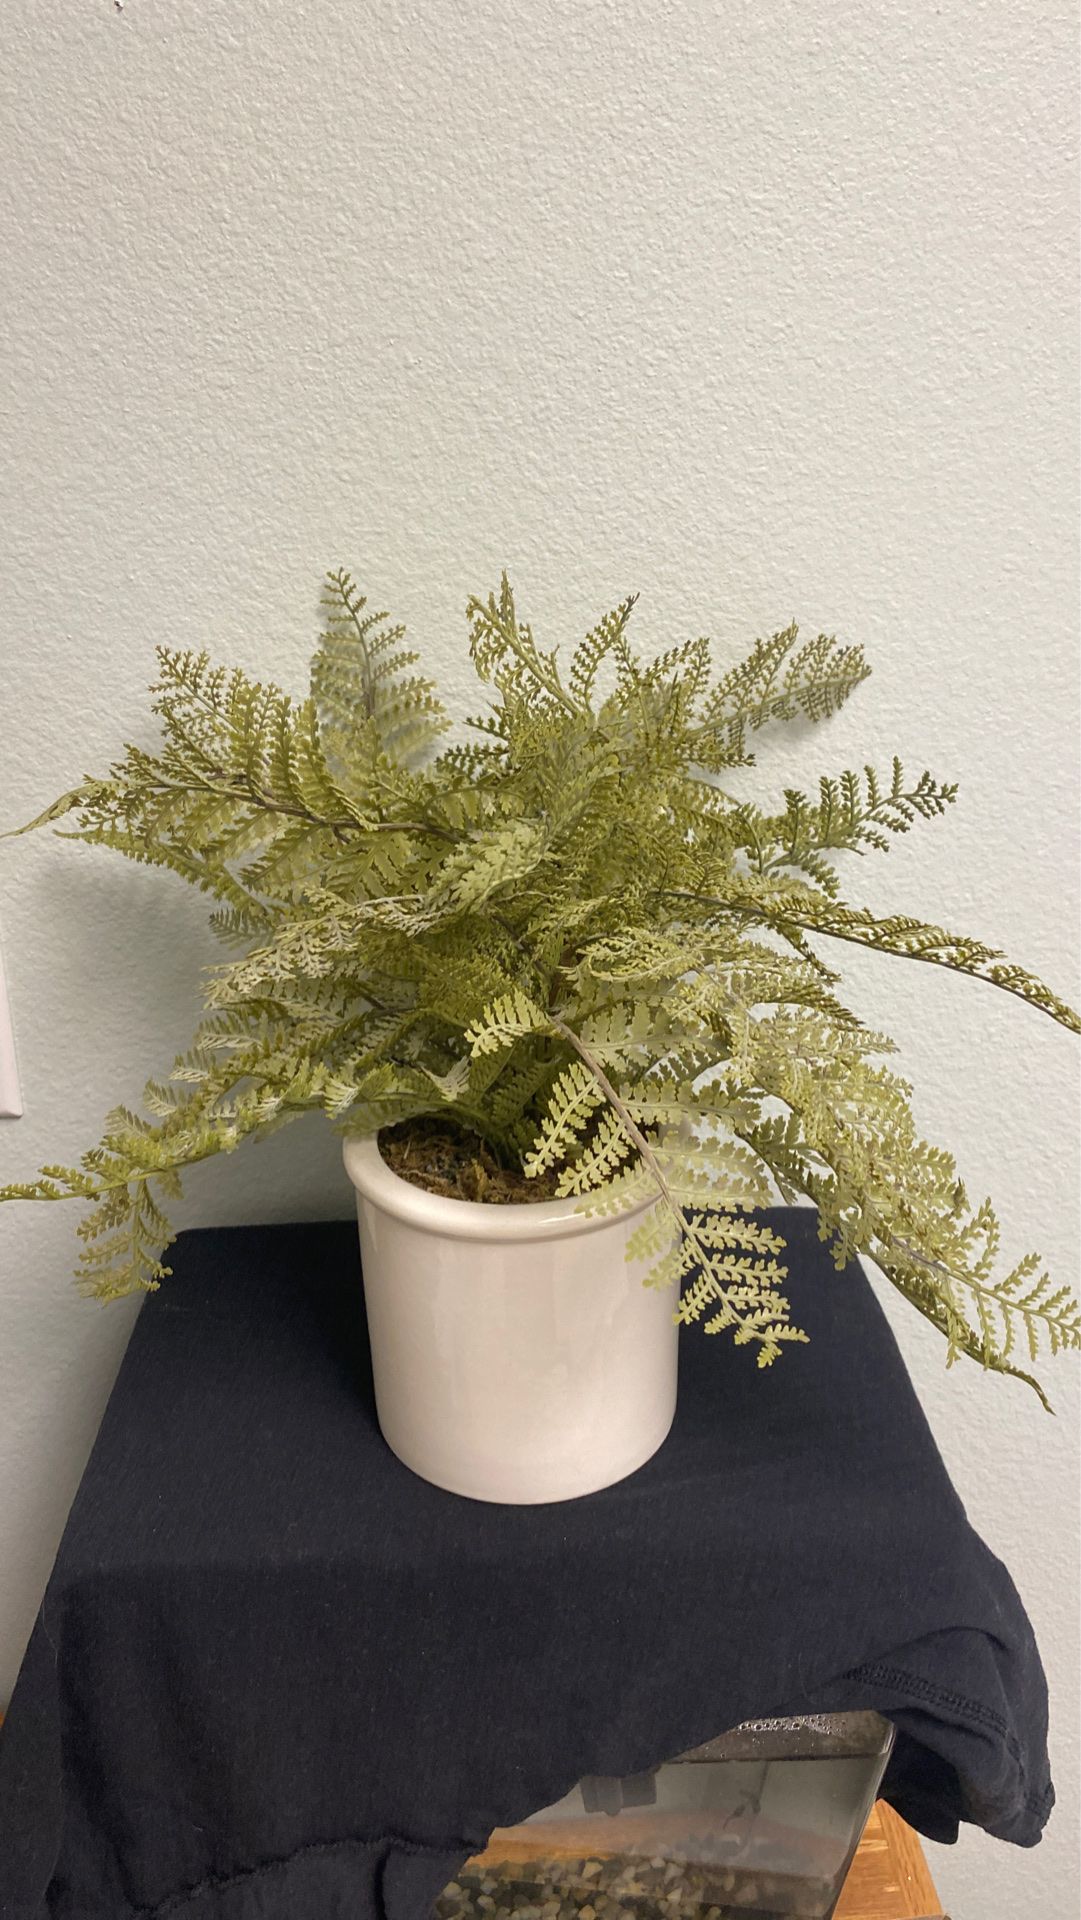 High Quality Fake Plant / Fern with Pot